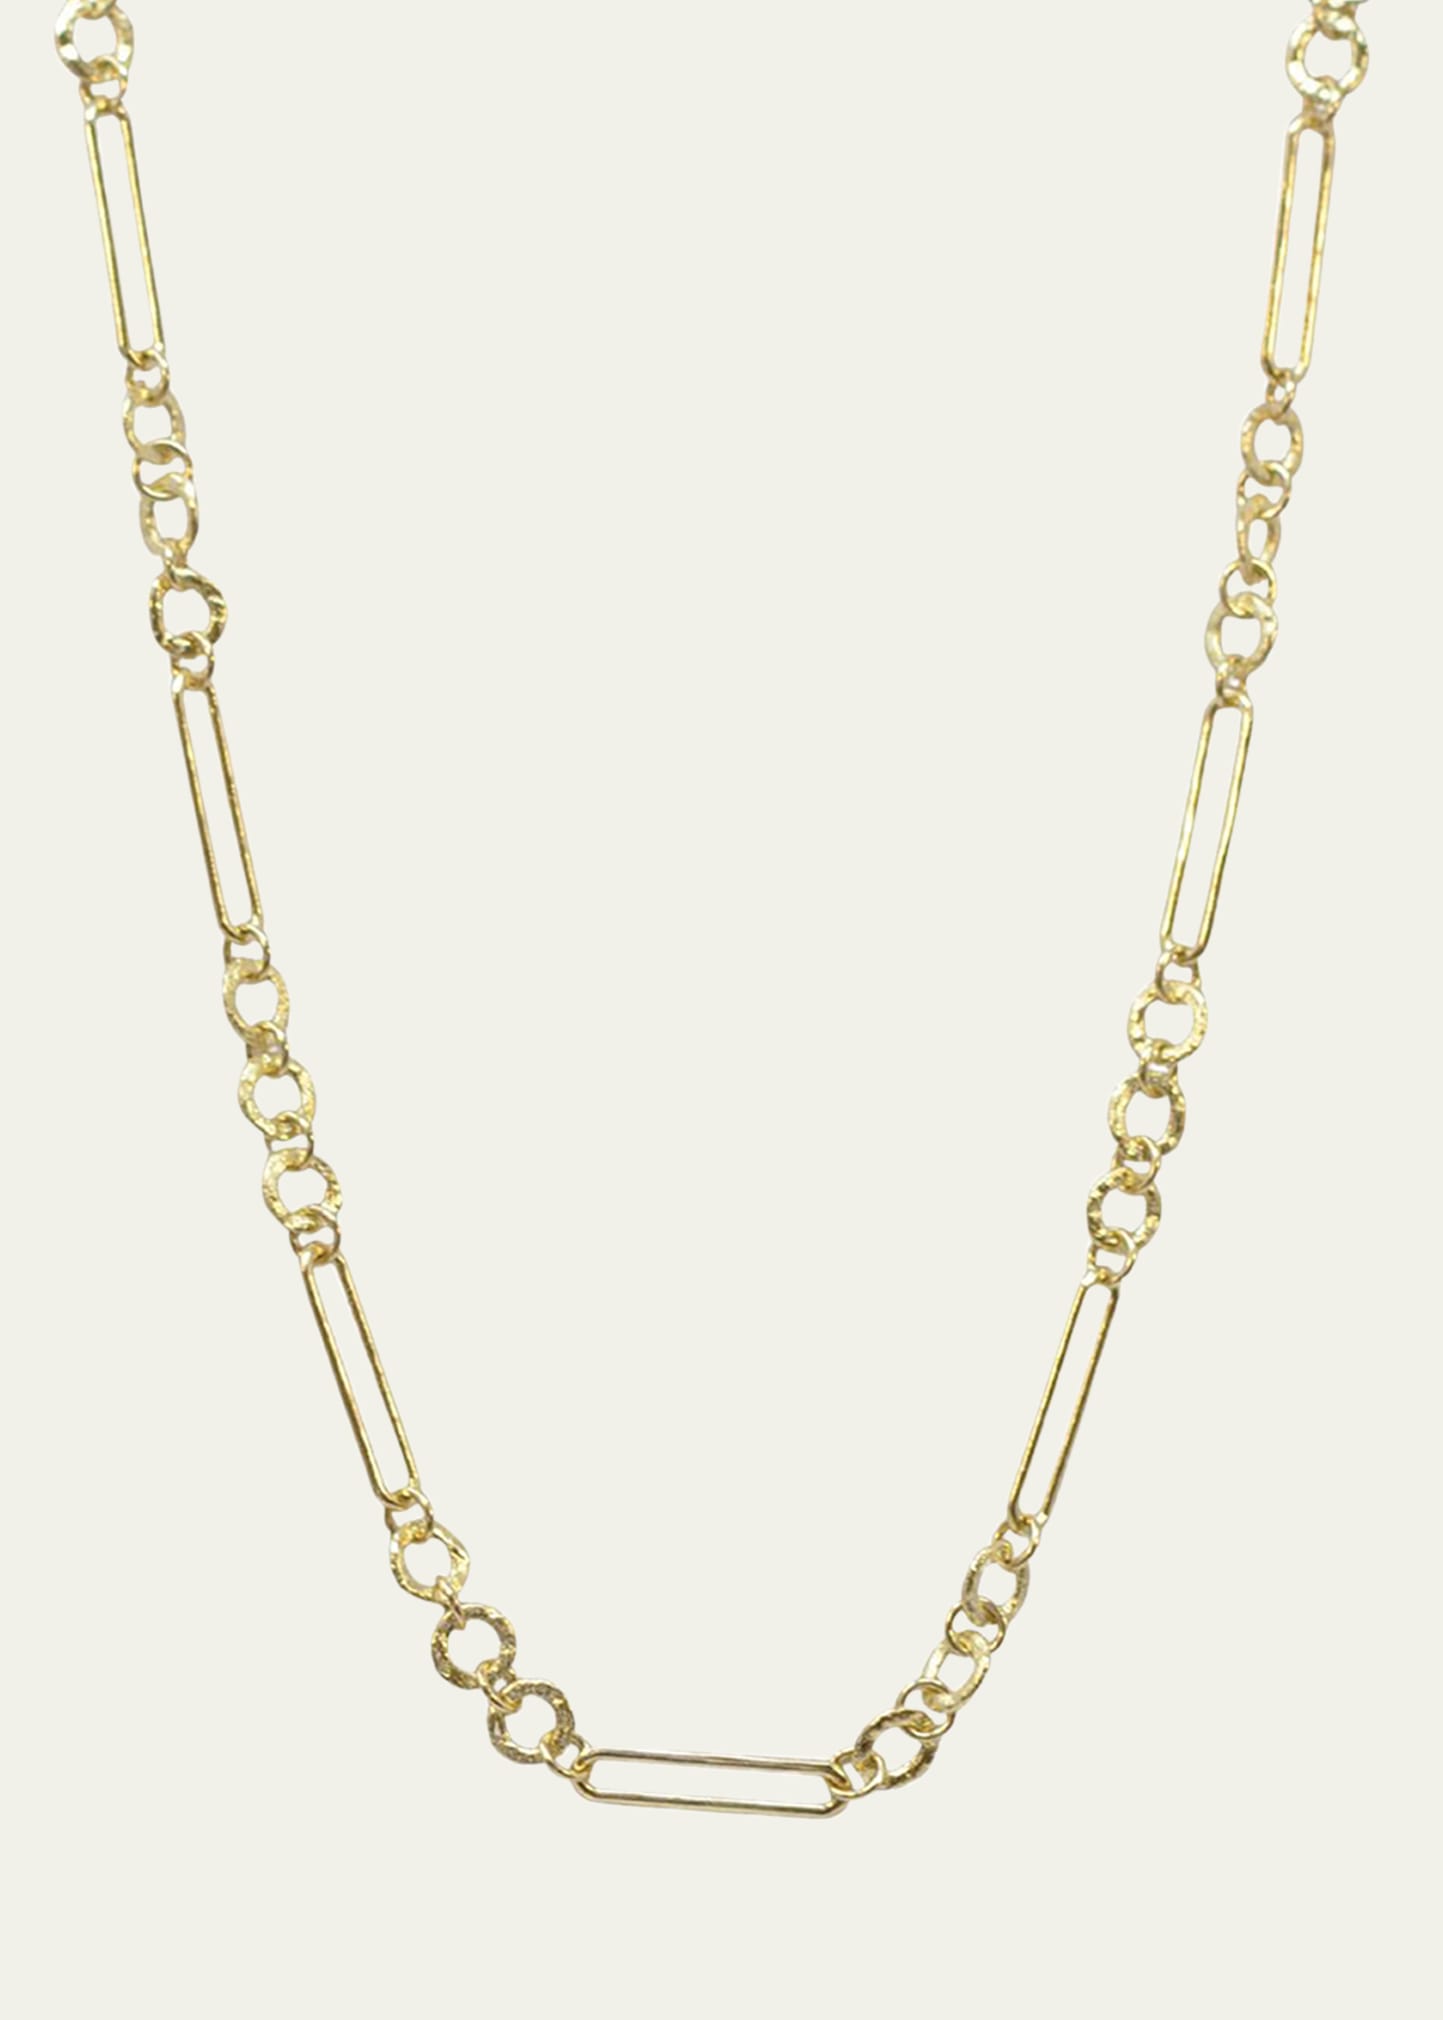 ARMENTA 18K YELLOW GOLD ADJUSTABLE NECKLACE